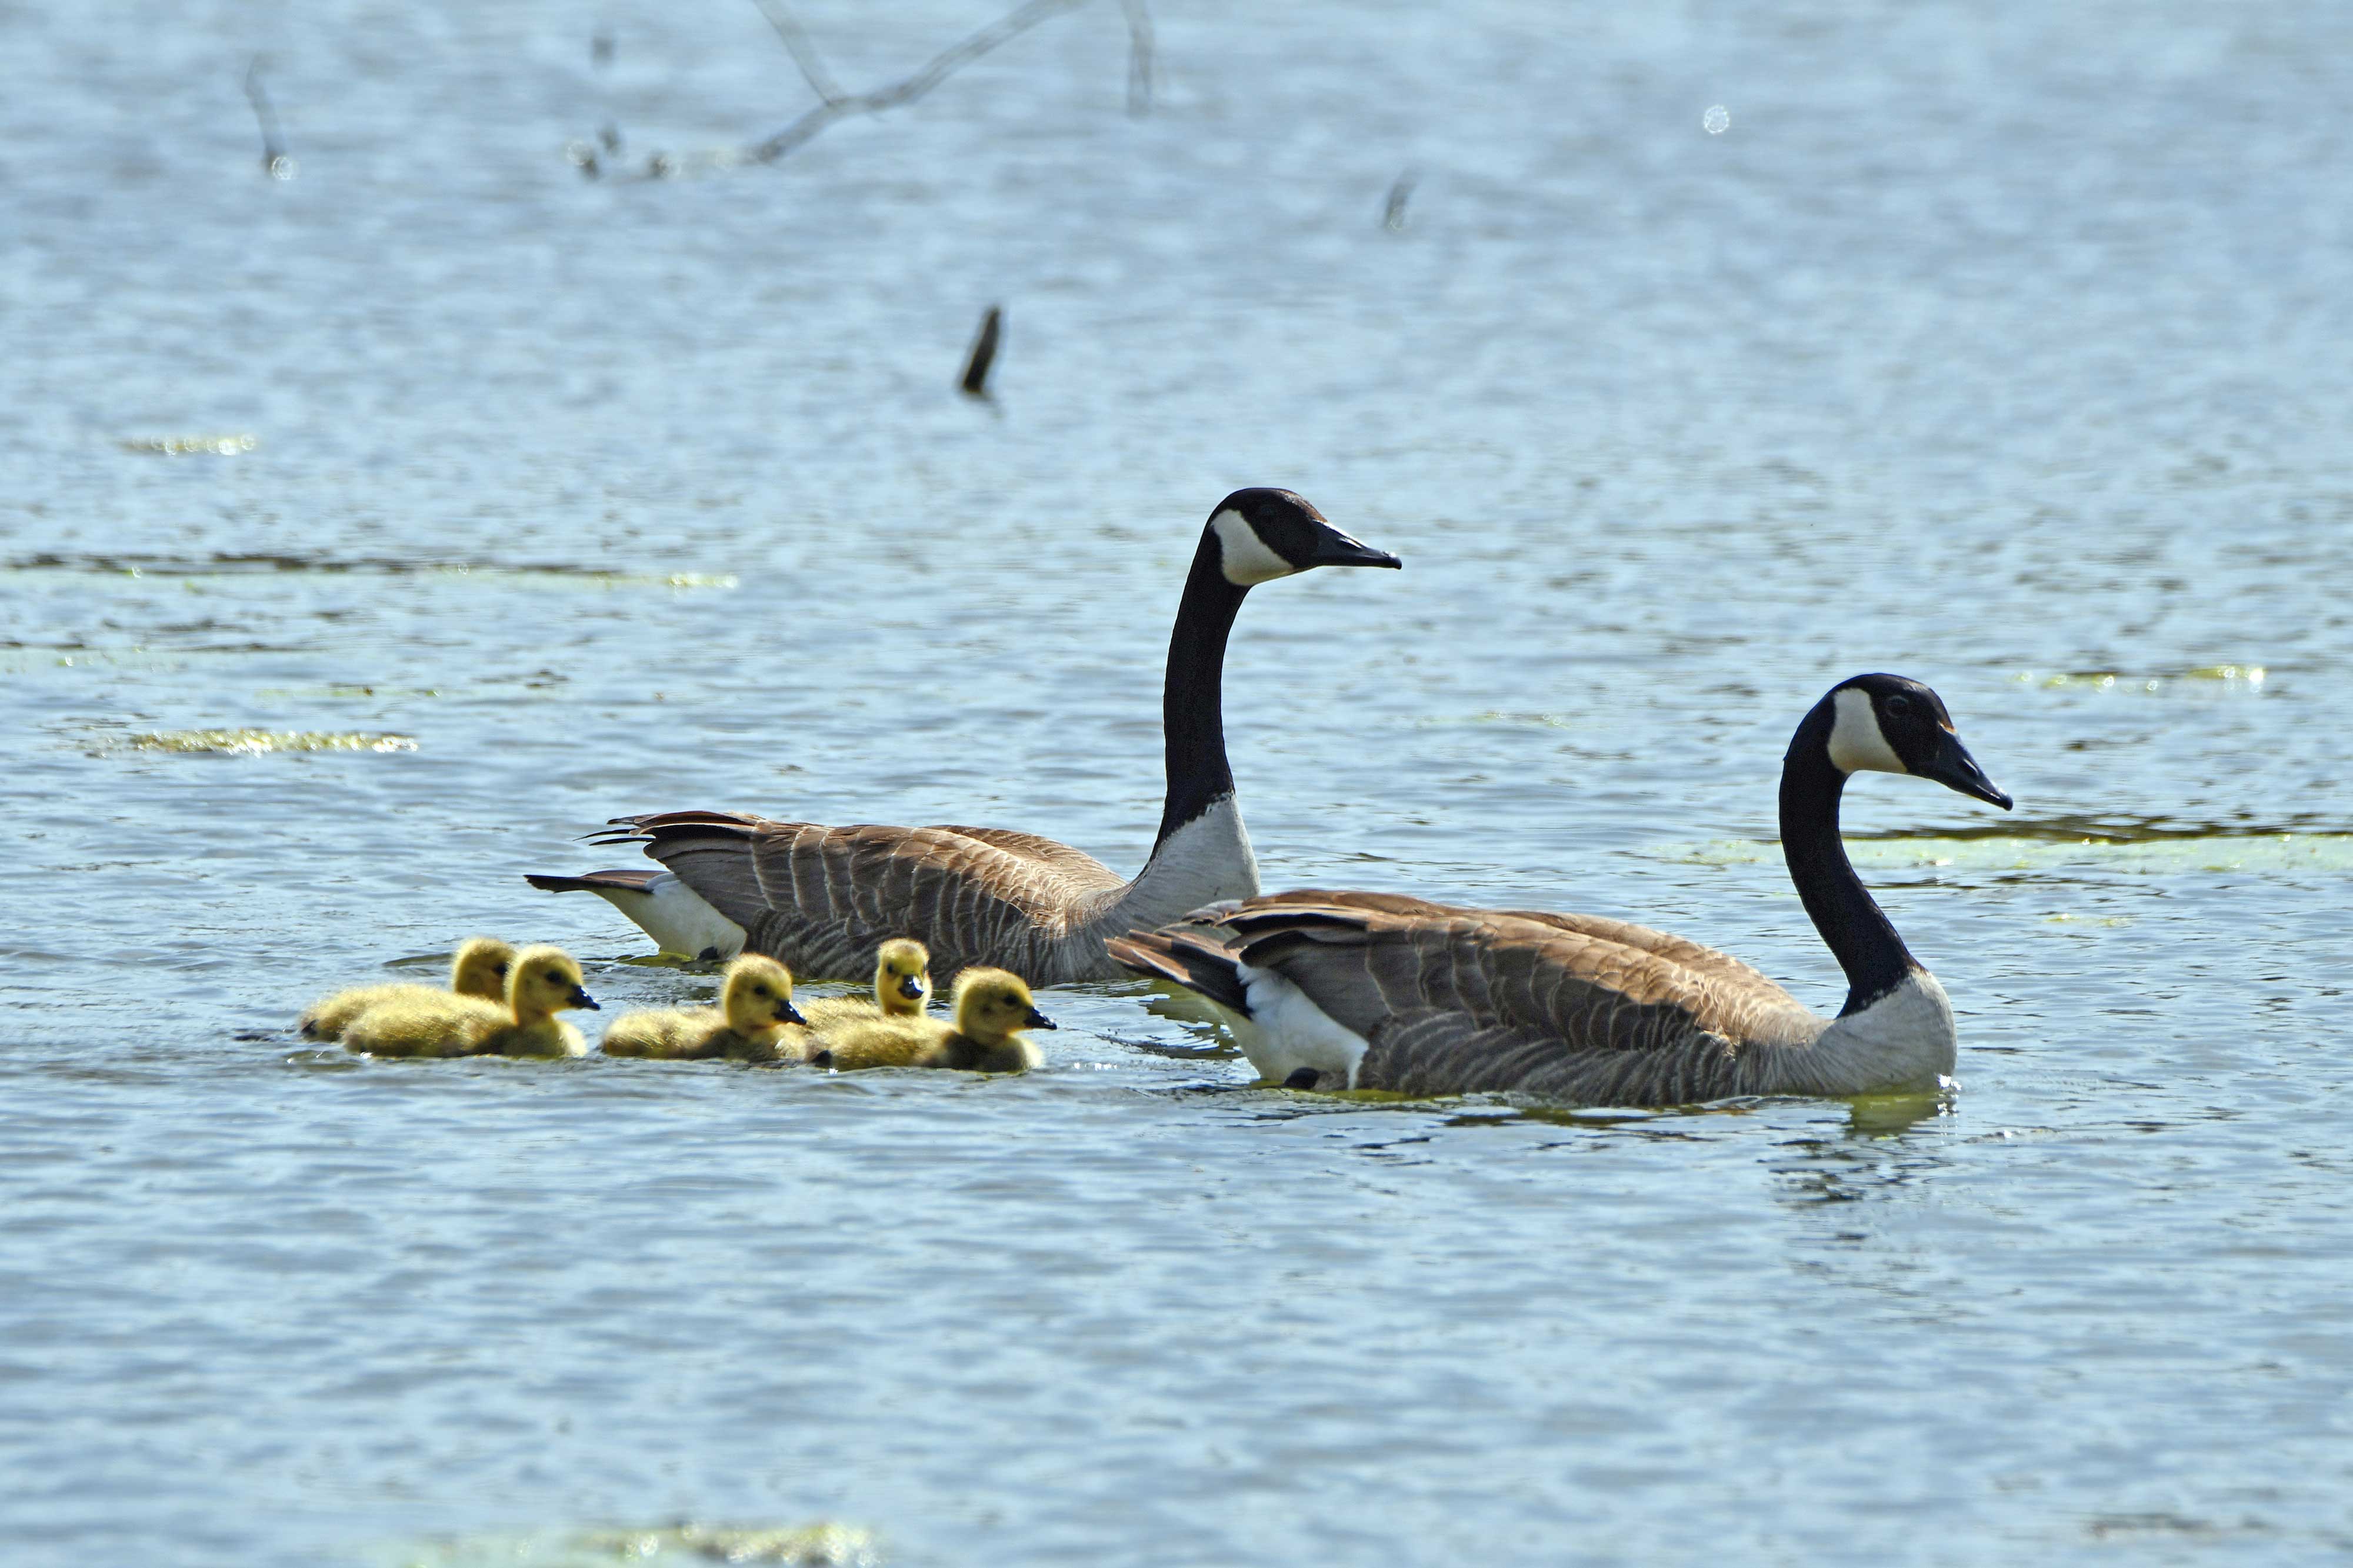 Two Canada geese with their goslings swimming in the water.